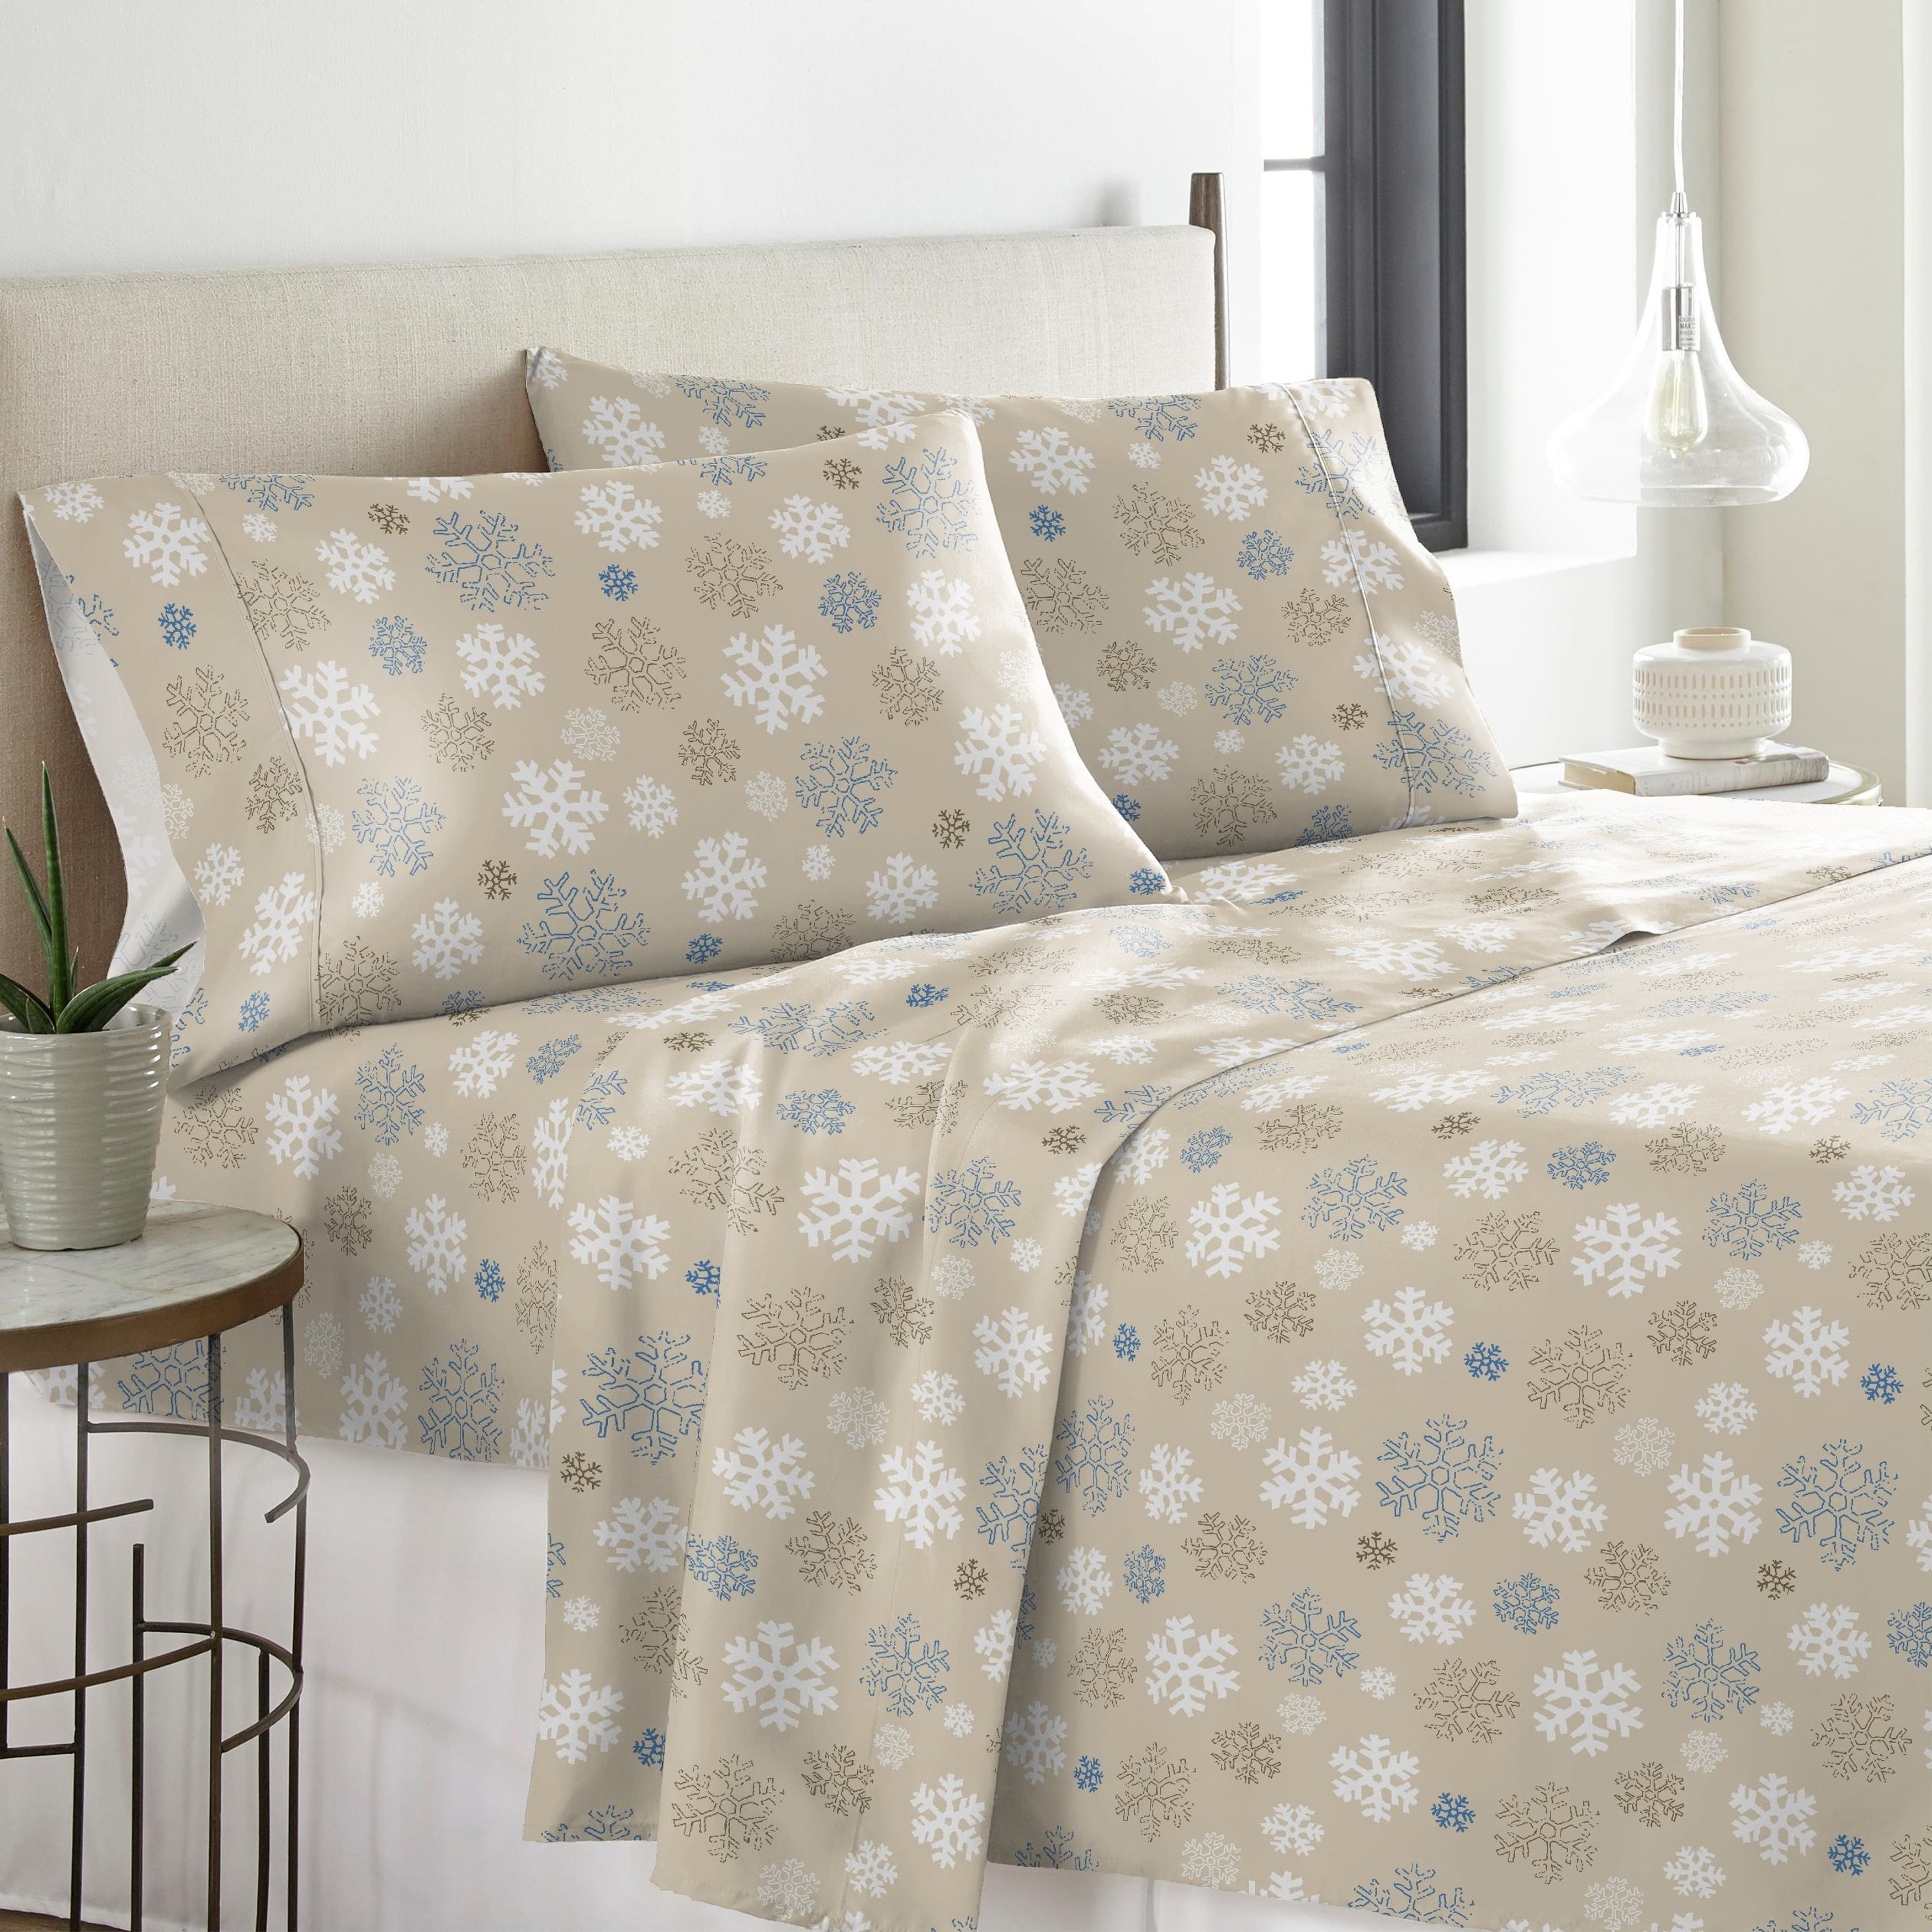 Pointehaven Solid or Print Cotton Heavyweight Flannel Bed Sheet Set